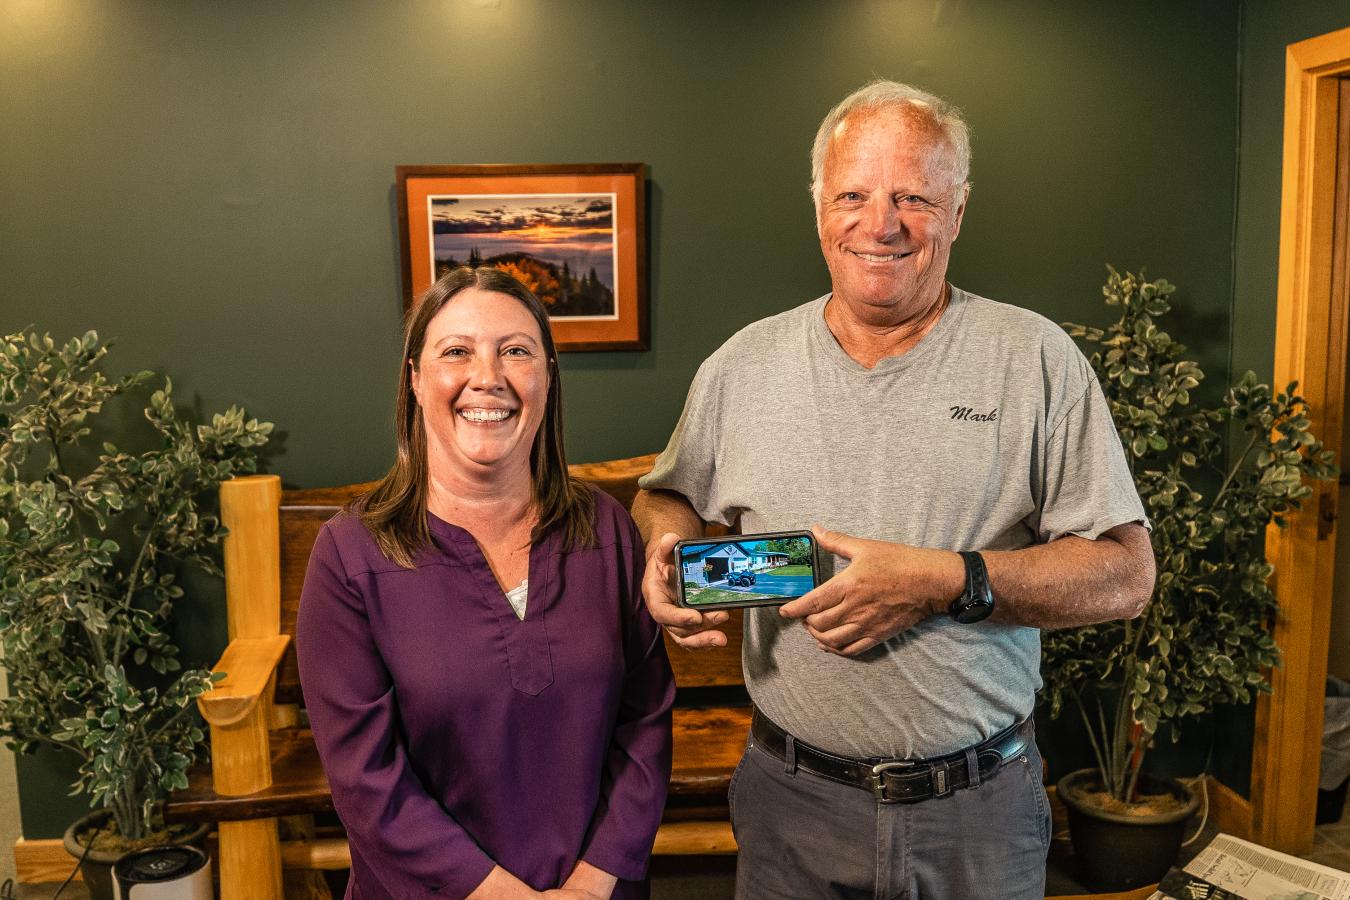 A financial counselor, and a member holding a photo of an RV they bought through a loan from Adirondack Regional Federal Credit Union